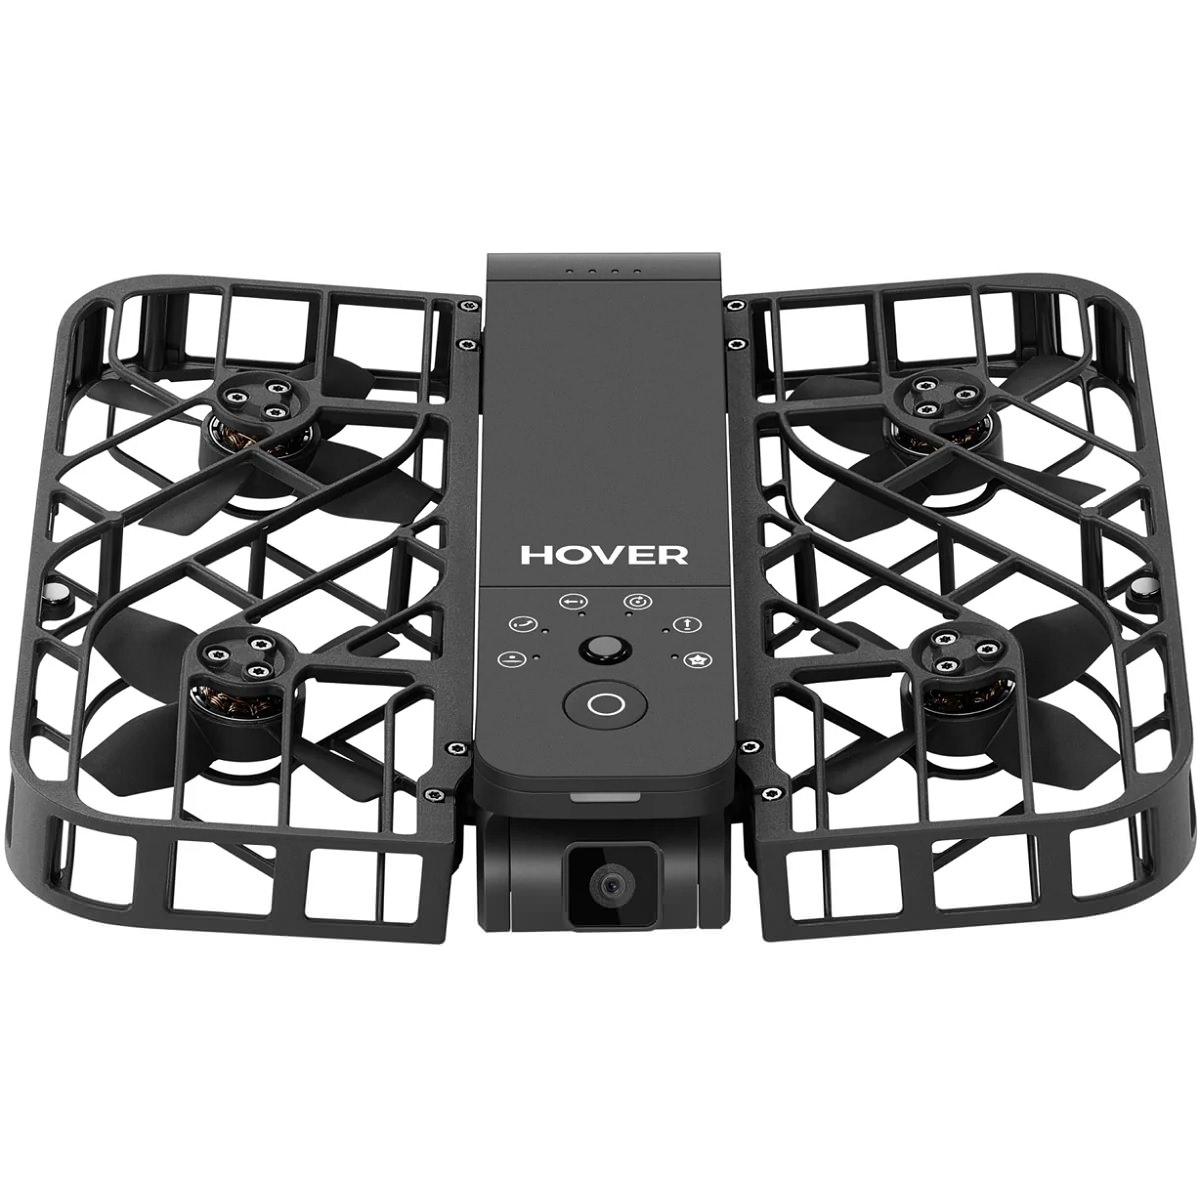 HOVERAir X1 Self-Flying Camera Pocket-Sized Drone HDR Video Capture  Follow-Me